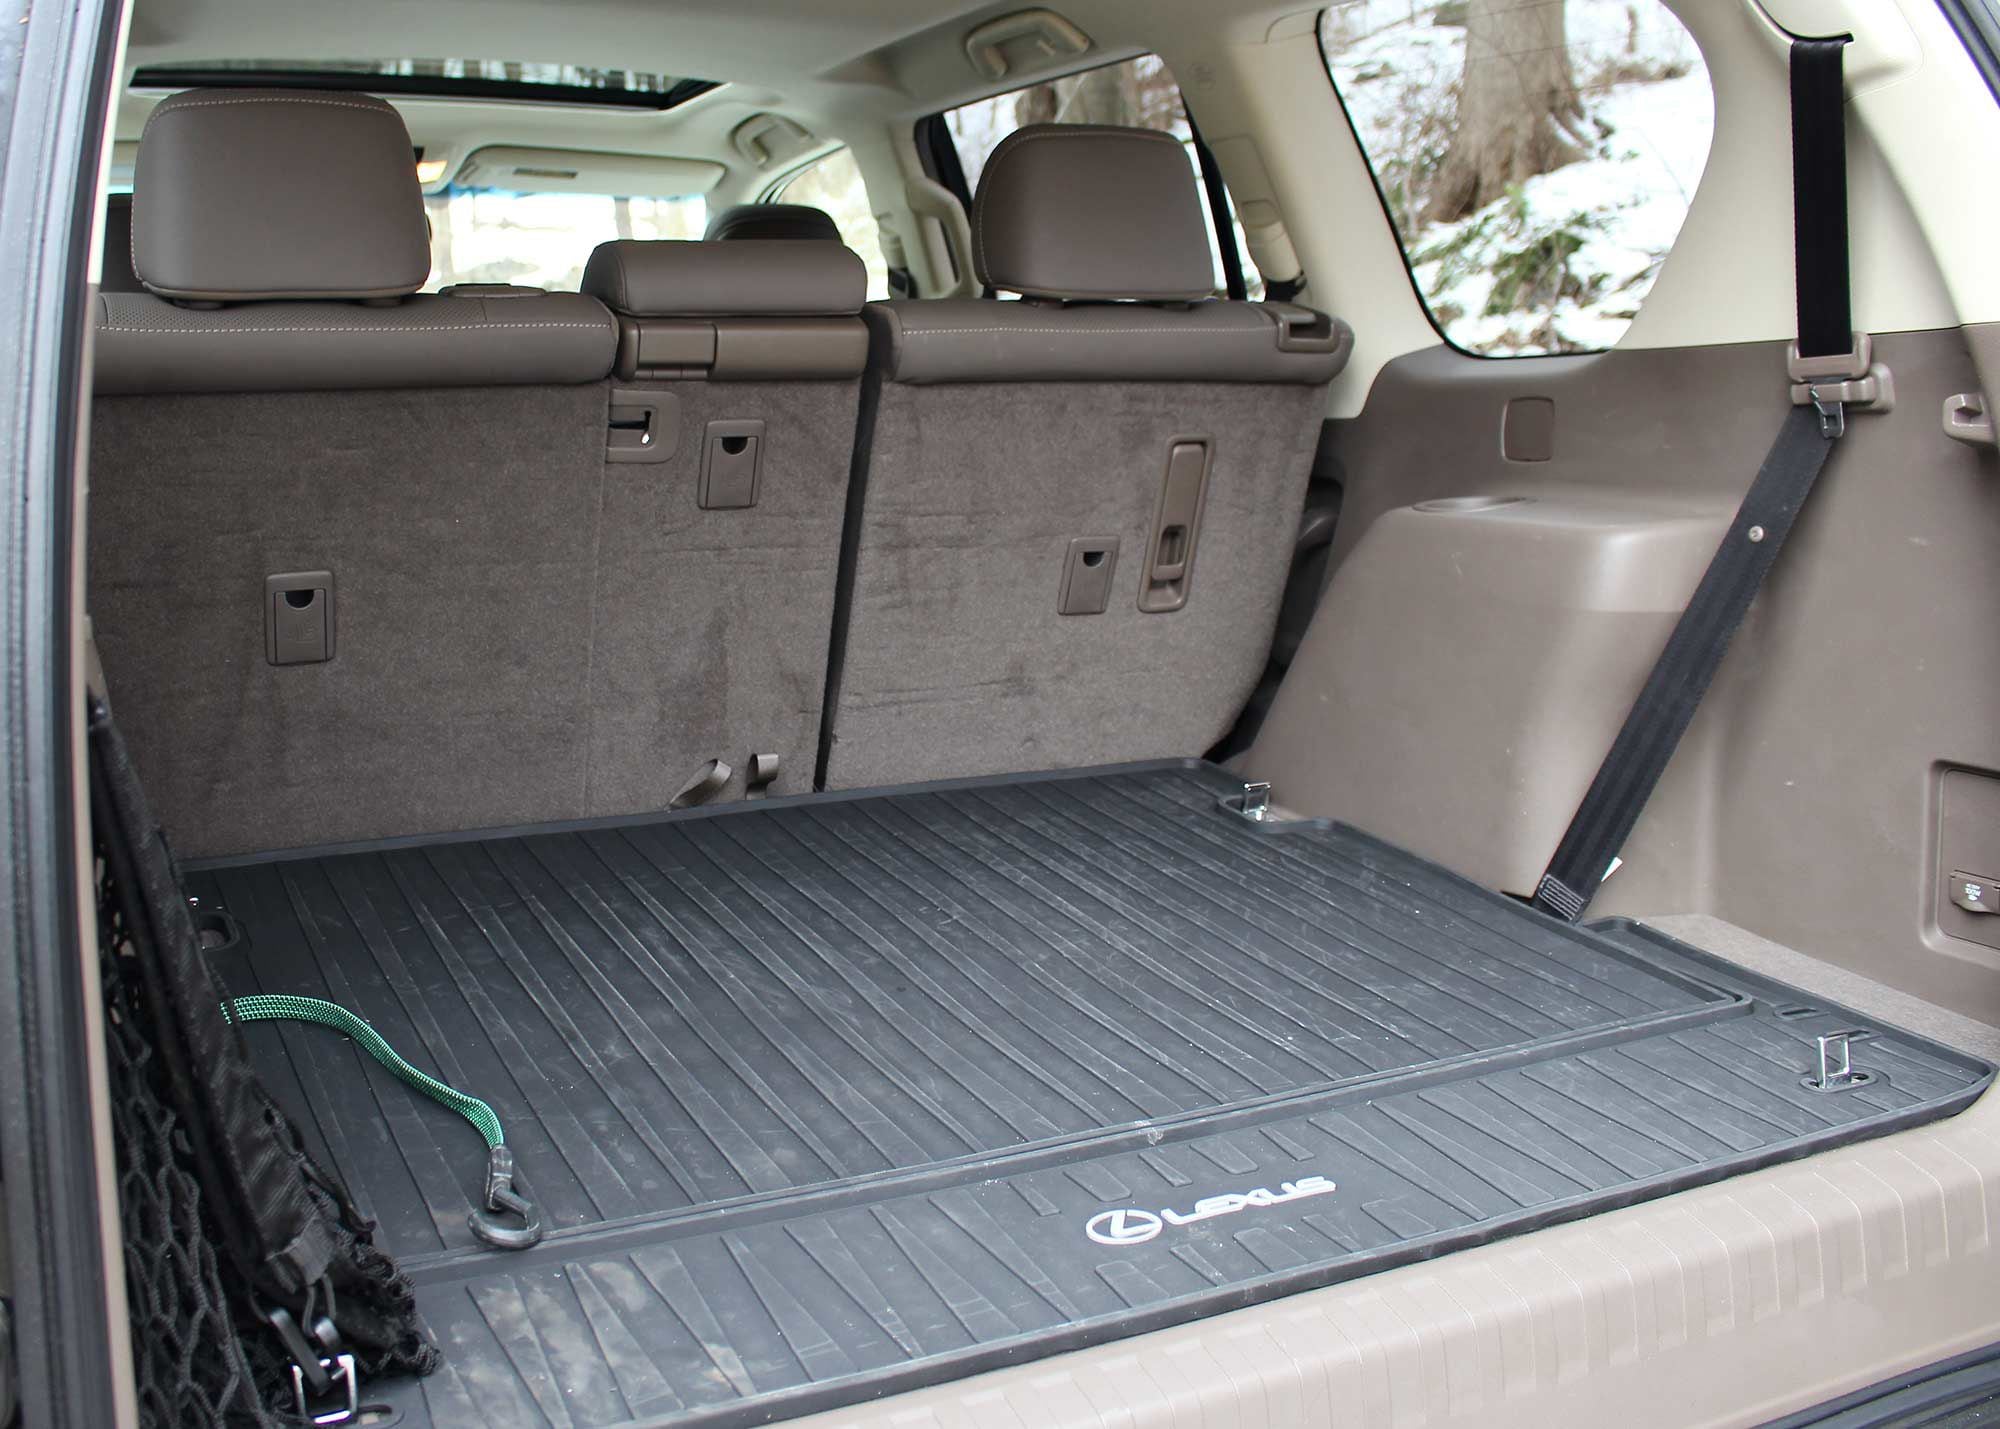 There’s ample space behind the GX 460’s second row to fit our usual assortment of riding gear, recovery equipment, and the parts and tools we carry with us.